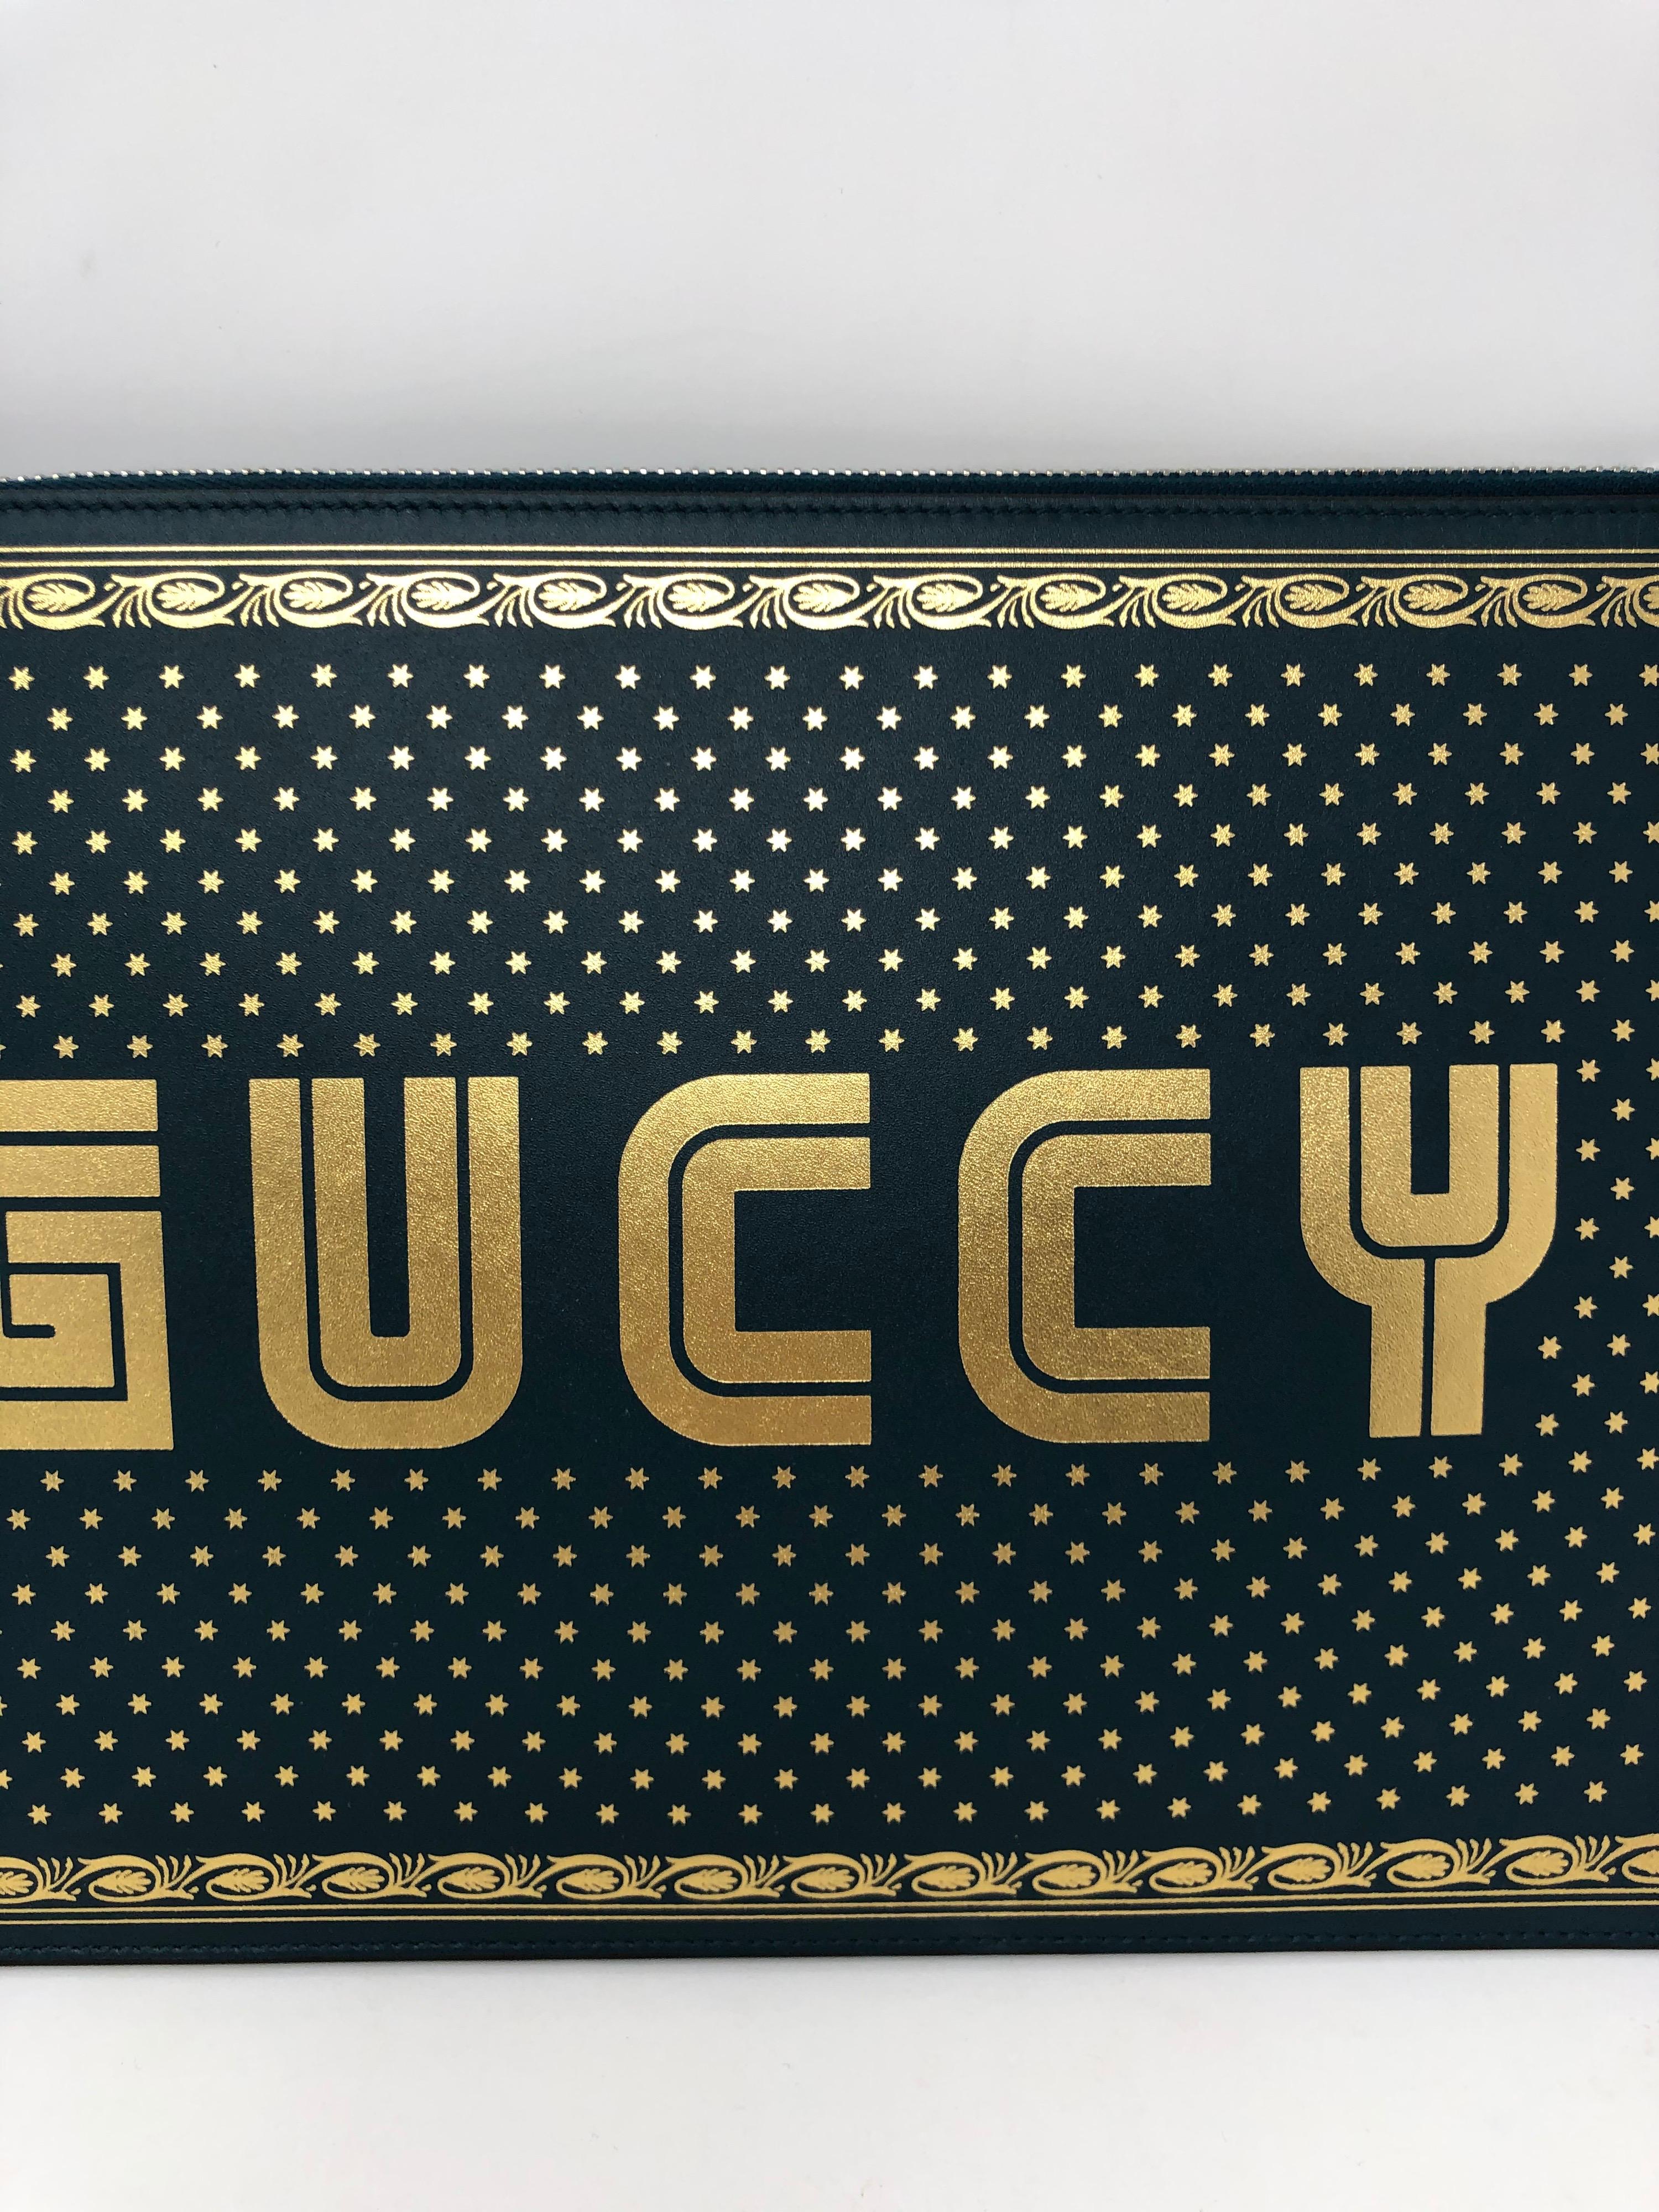 Gucci Green Clutch. Limited edition written out Guccy by Gucci. Gold embossed over green leather clutch. Excellent like new condition. Guaranteed authentic. 